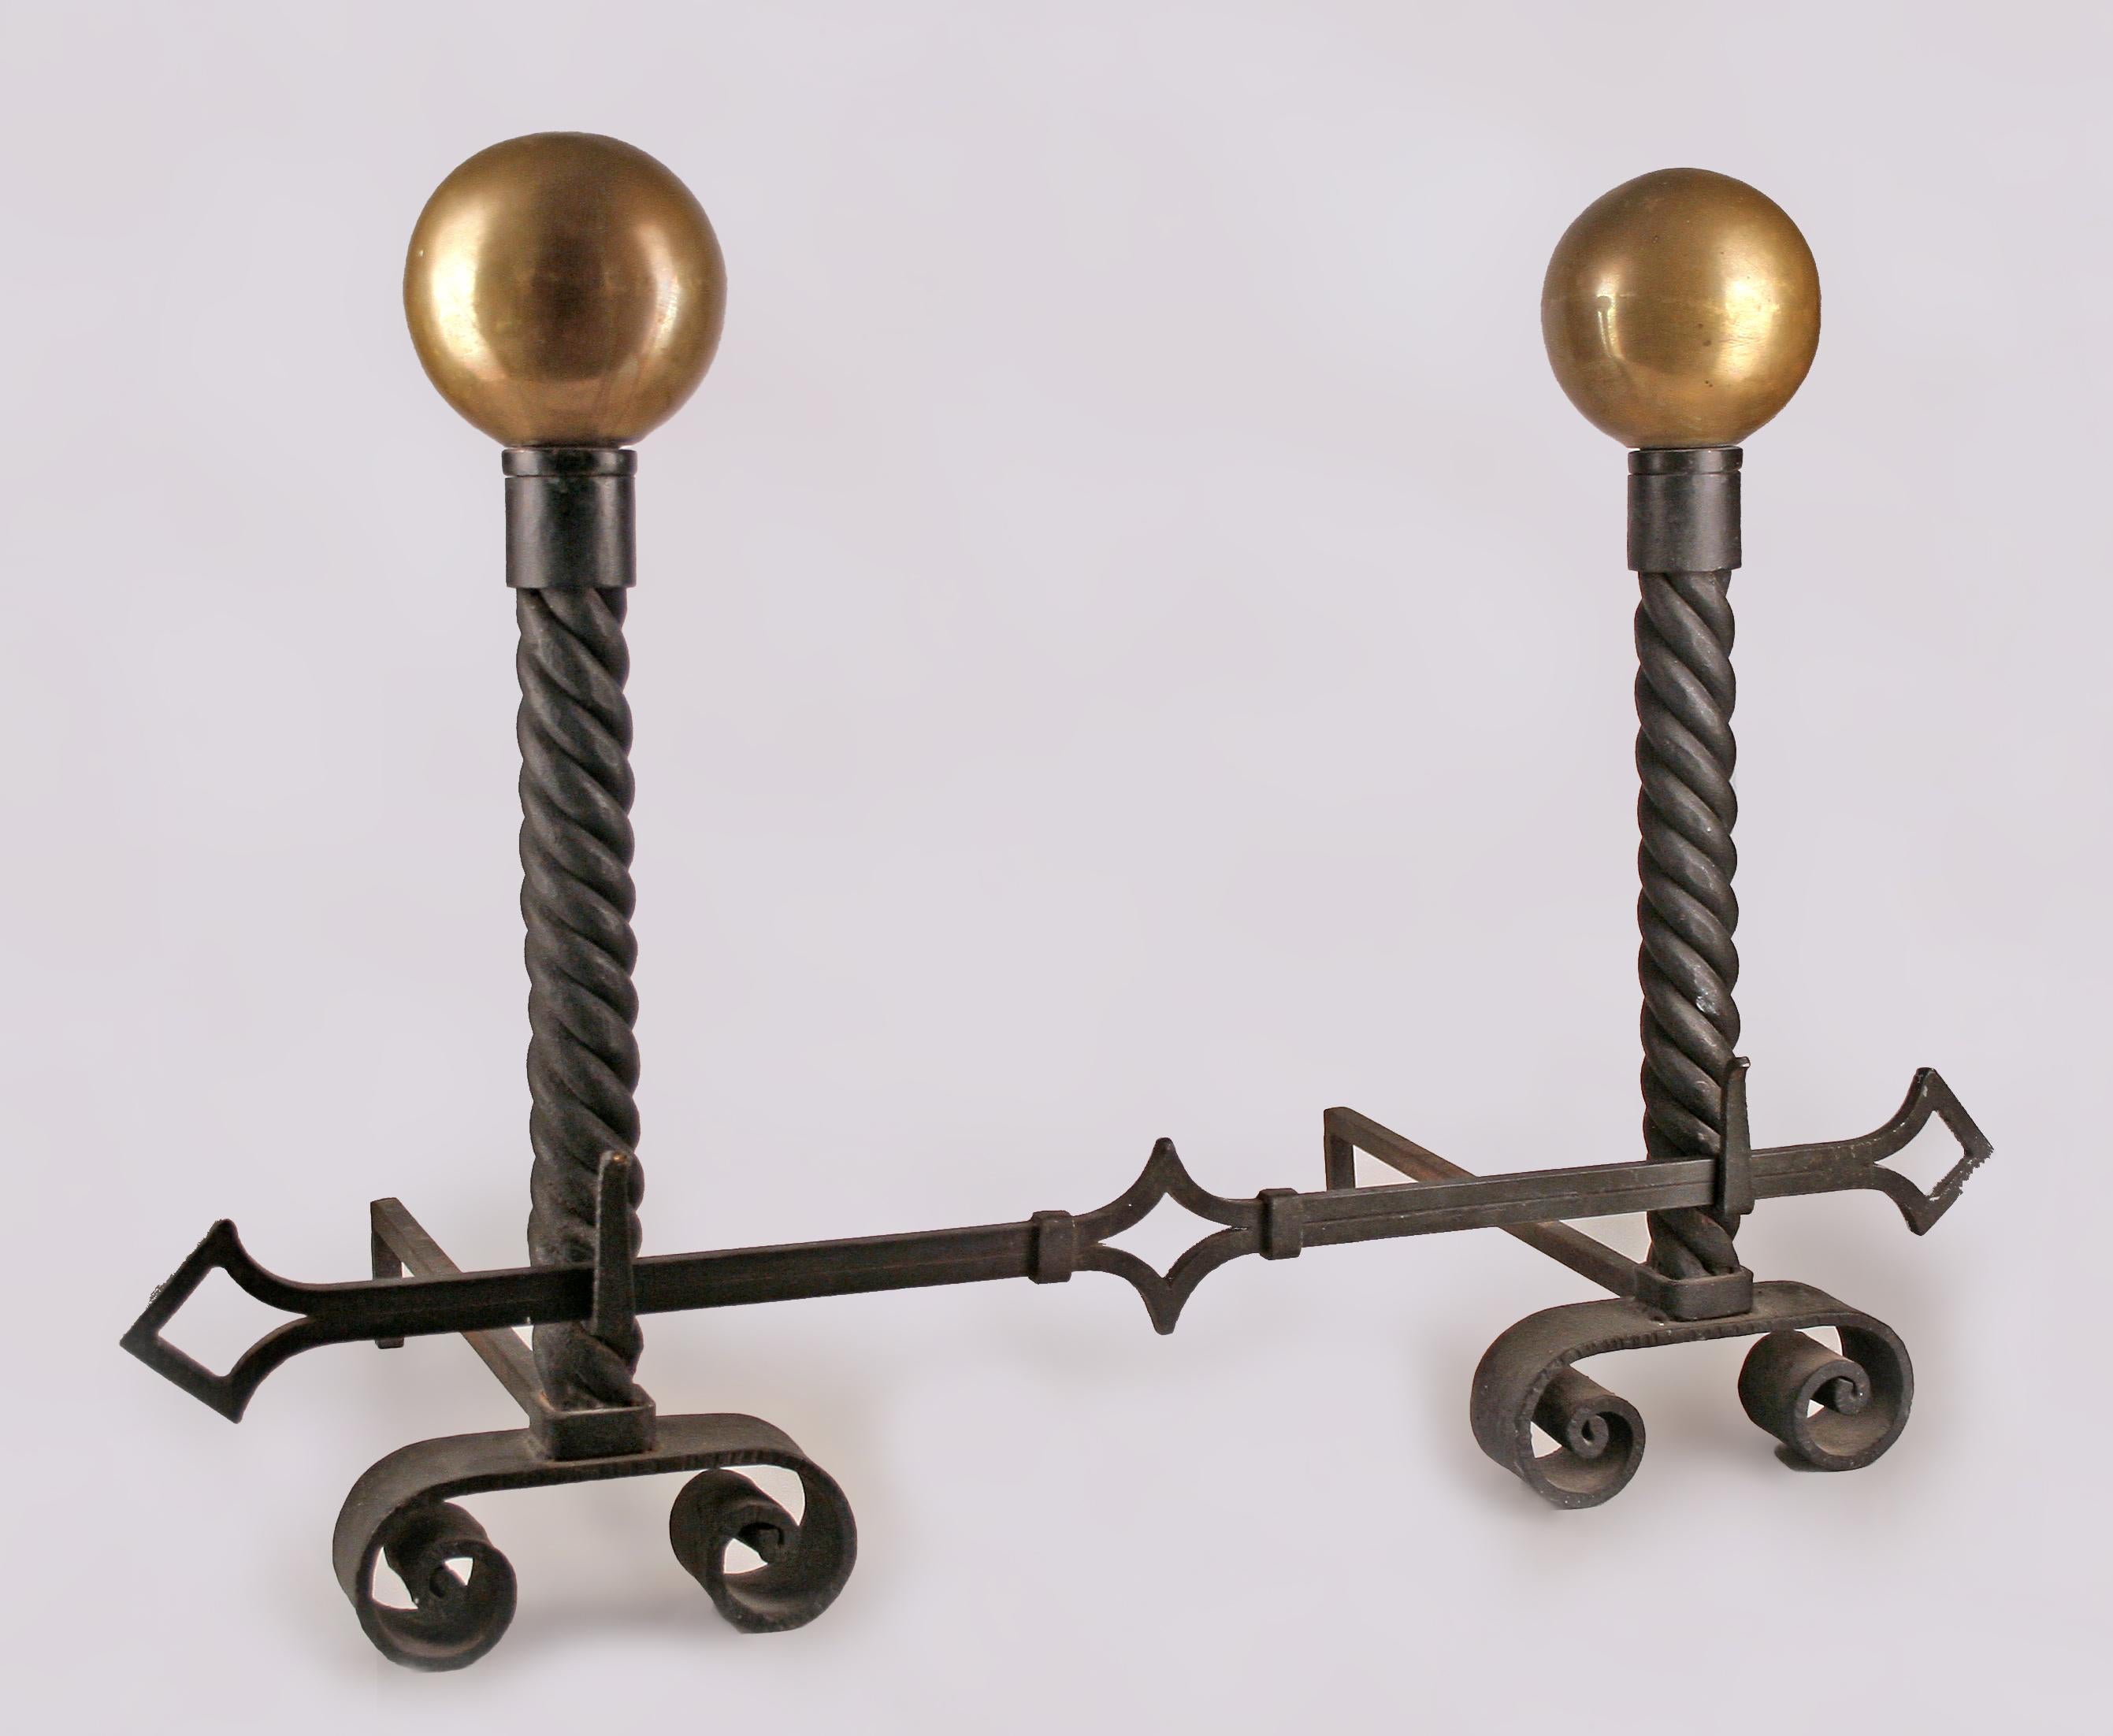 Set of mid-20th century Modern wrought iron gilted andirons by french metalworker and decorator Gilbert Poillerat

By: Gilbert Poillerat
Material: iron, metal, wrought iron
Technique: forged, hammered, gilt, patinated, metalwork, cast
Dimensions: 8